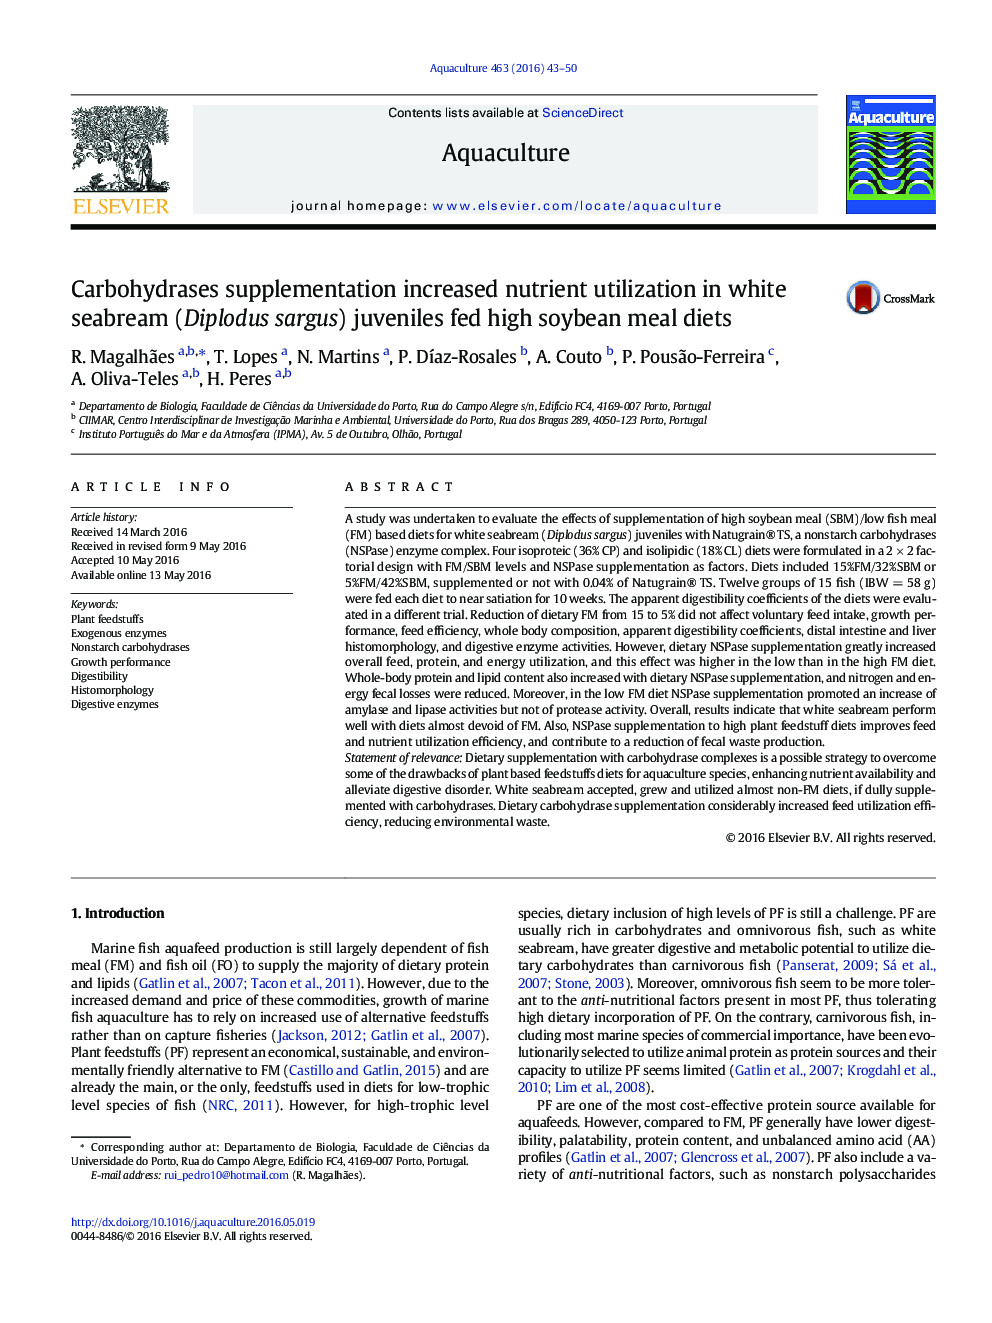 Carbohydrases supplementation increased nutrient utilization in white seabream (Diplodus sargus) juveniles fed high soybean meal diets